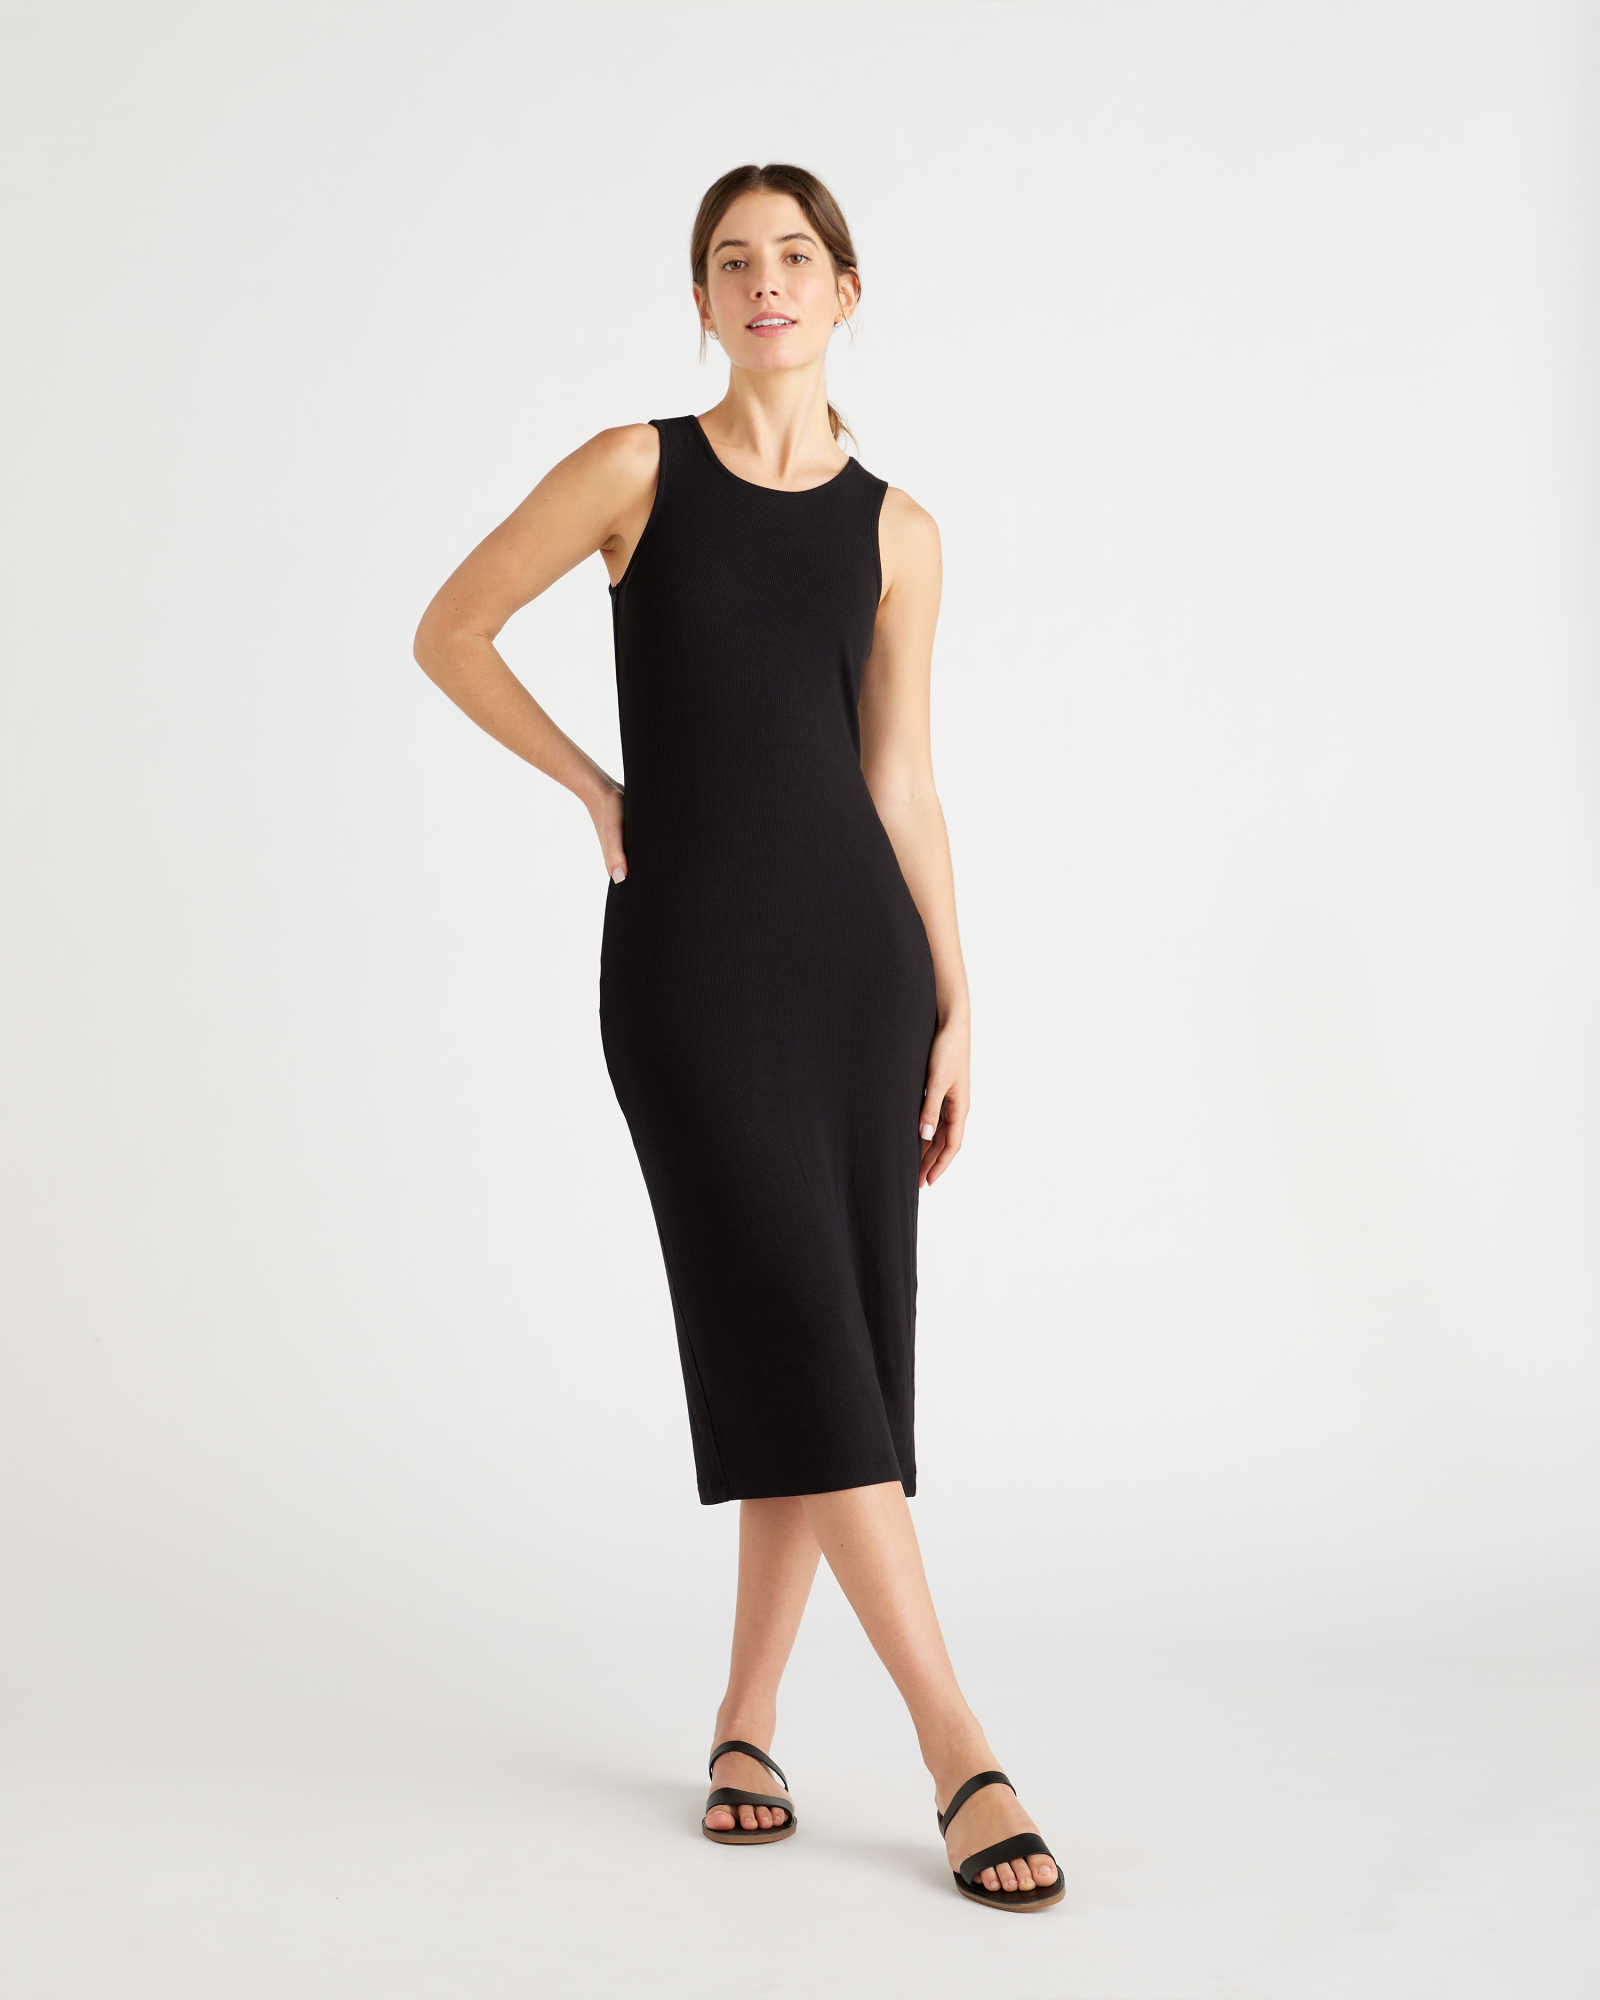 Woman wearing a rib knit dress in black from front